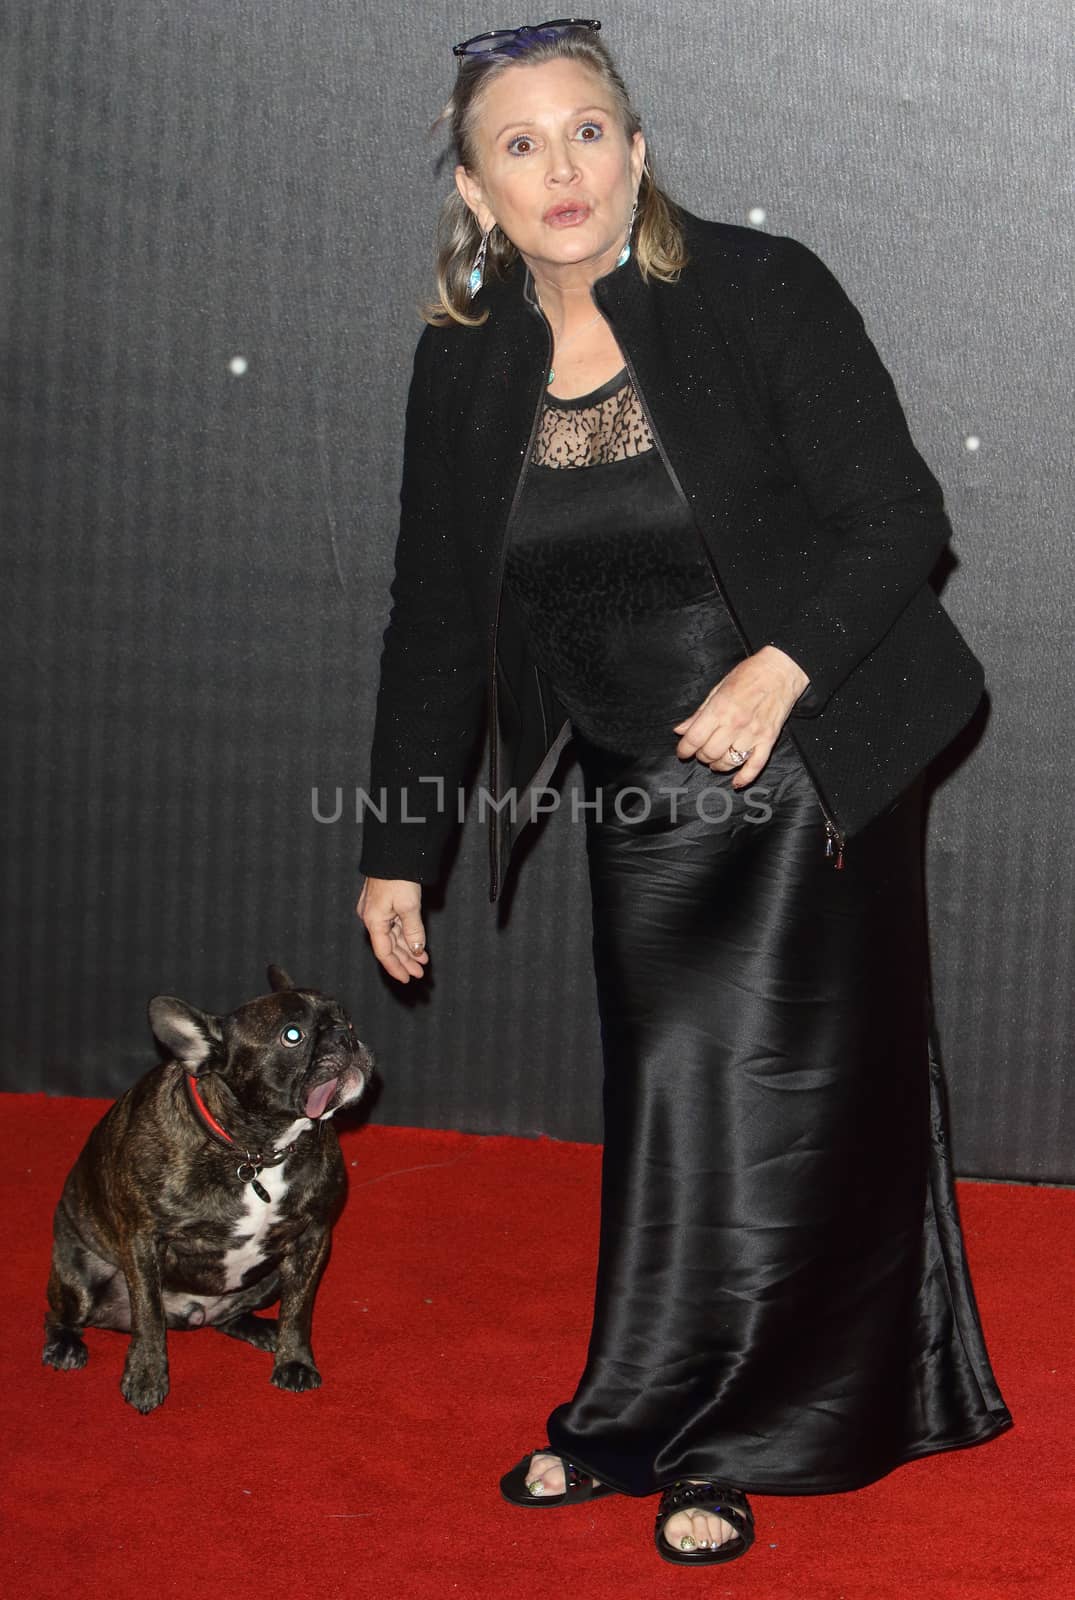 UNITED-KINGDOM, London : The Princess Leia actress Carrie Fisher walks the with her pet pooch Gary while Star Wars cast, crew and celebrities hit the red carpet for the last episode The Force Awakens European Premiere on December 16, 2015 in central London.   	